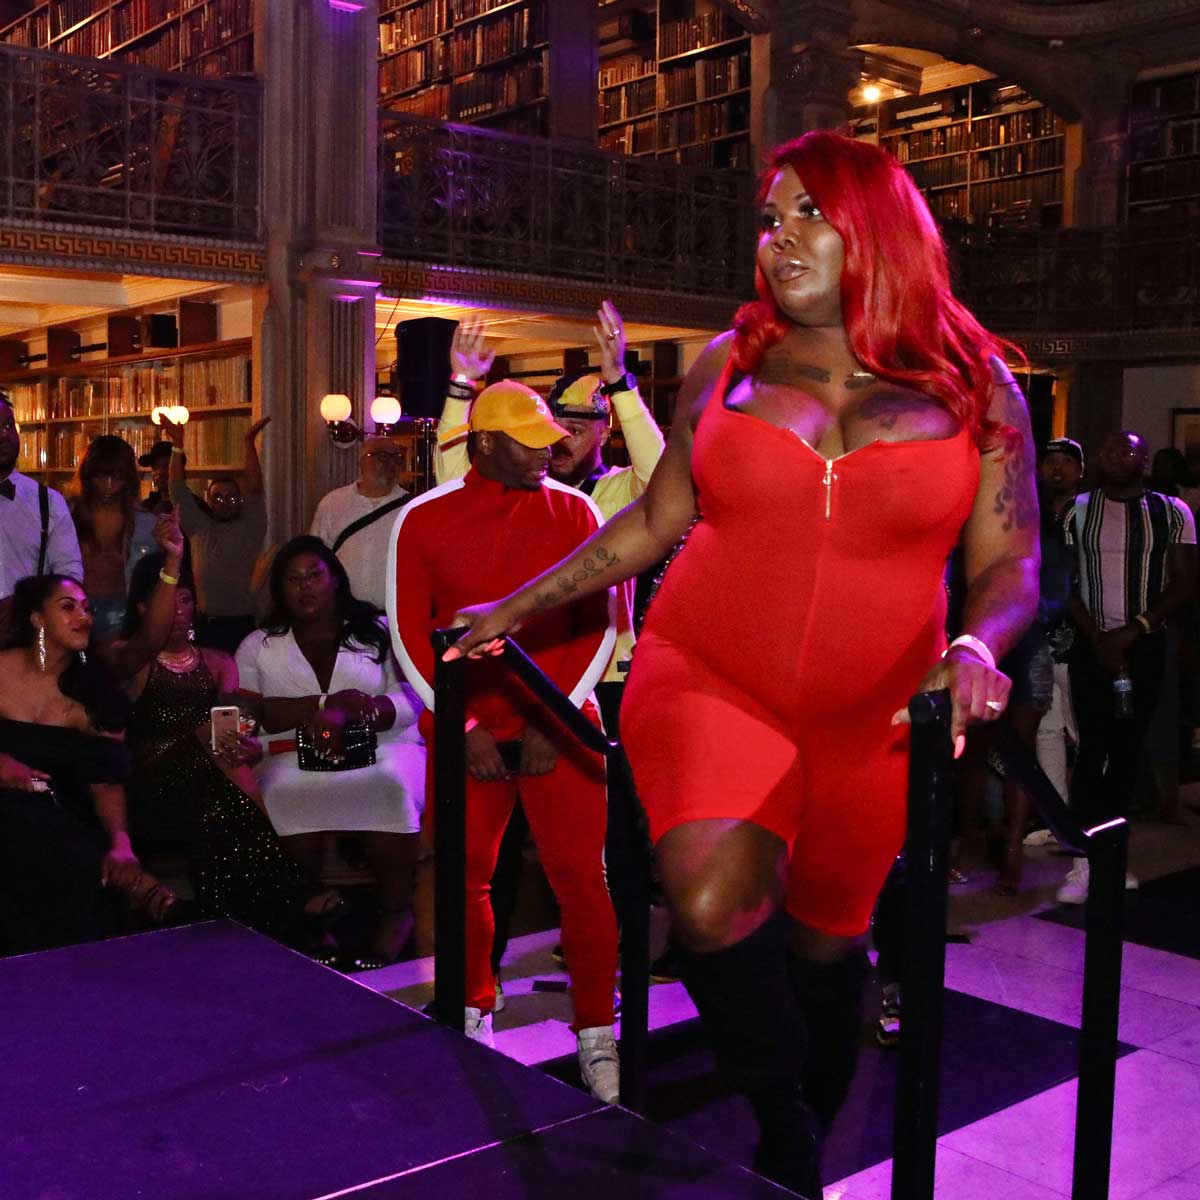 Performer in red bodysuit prepares to take the stage